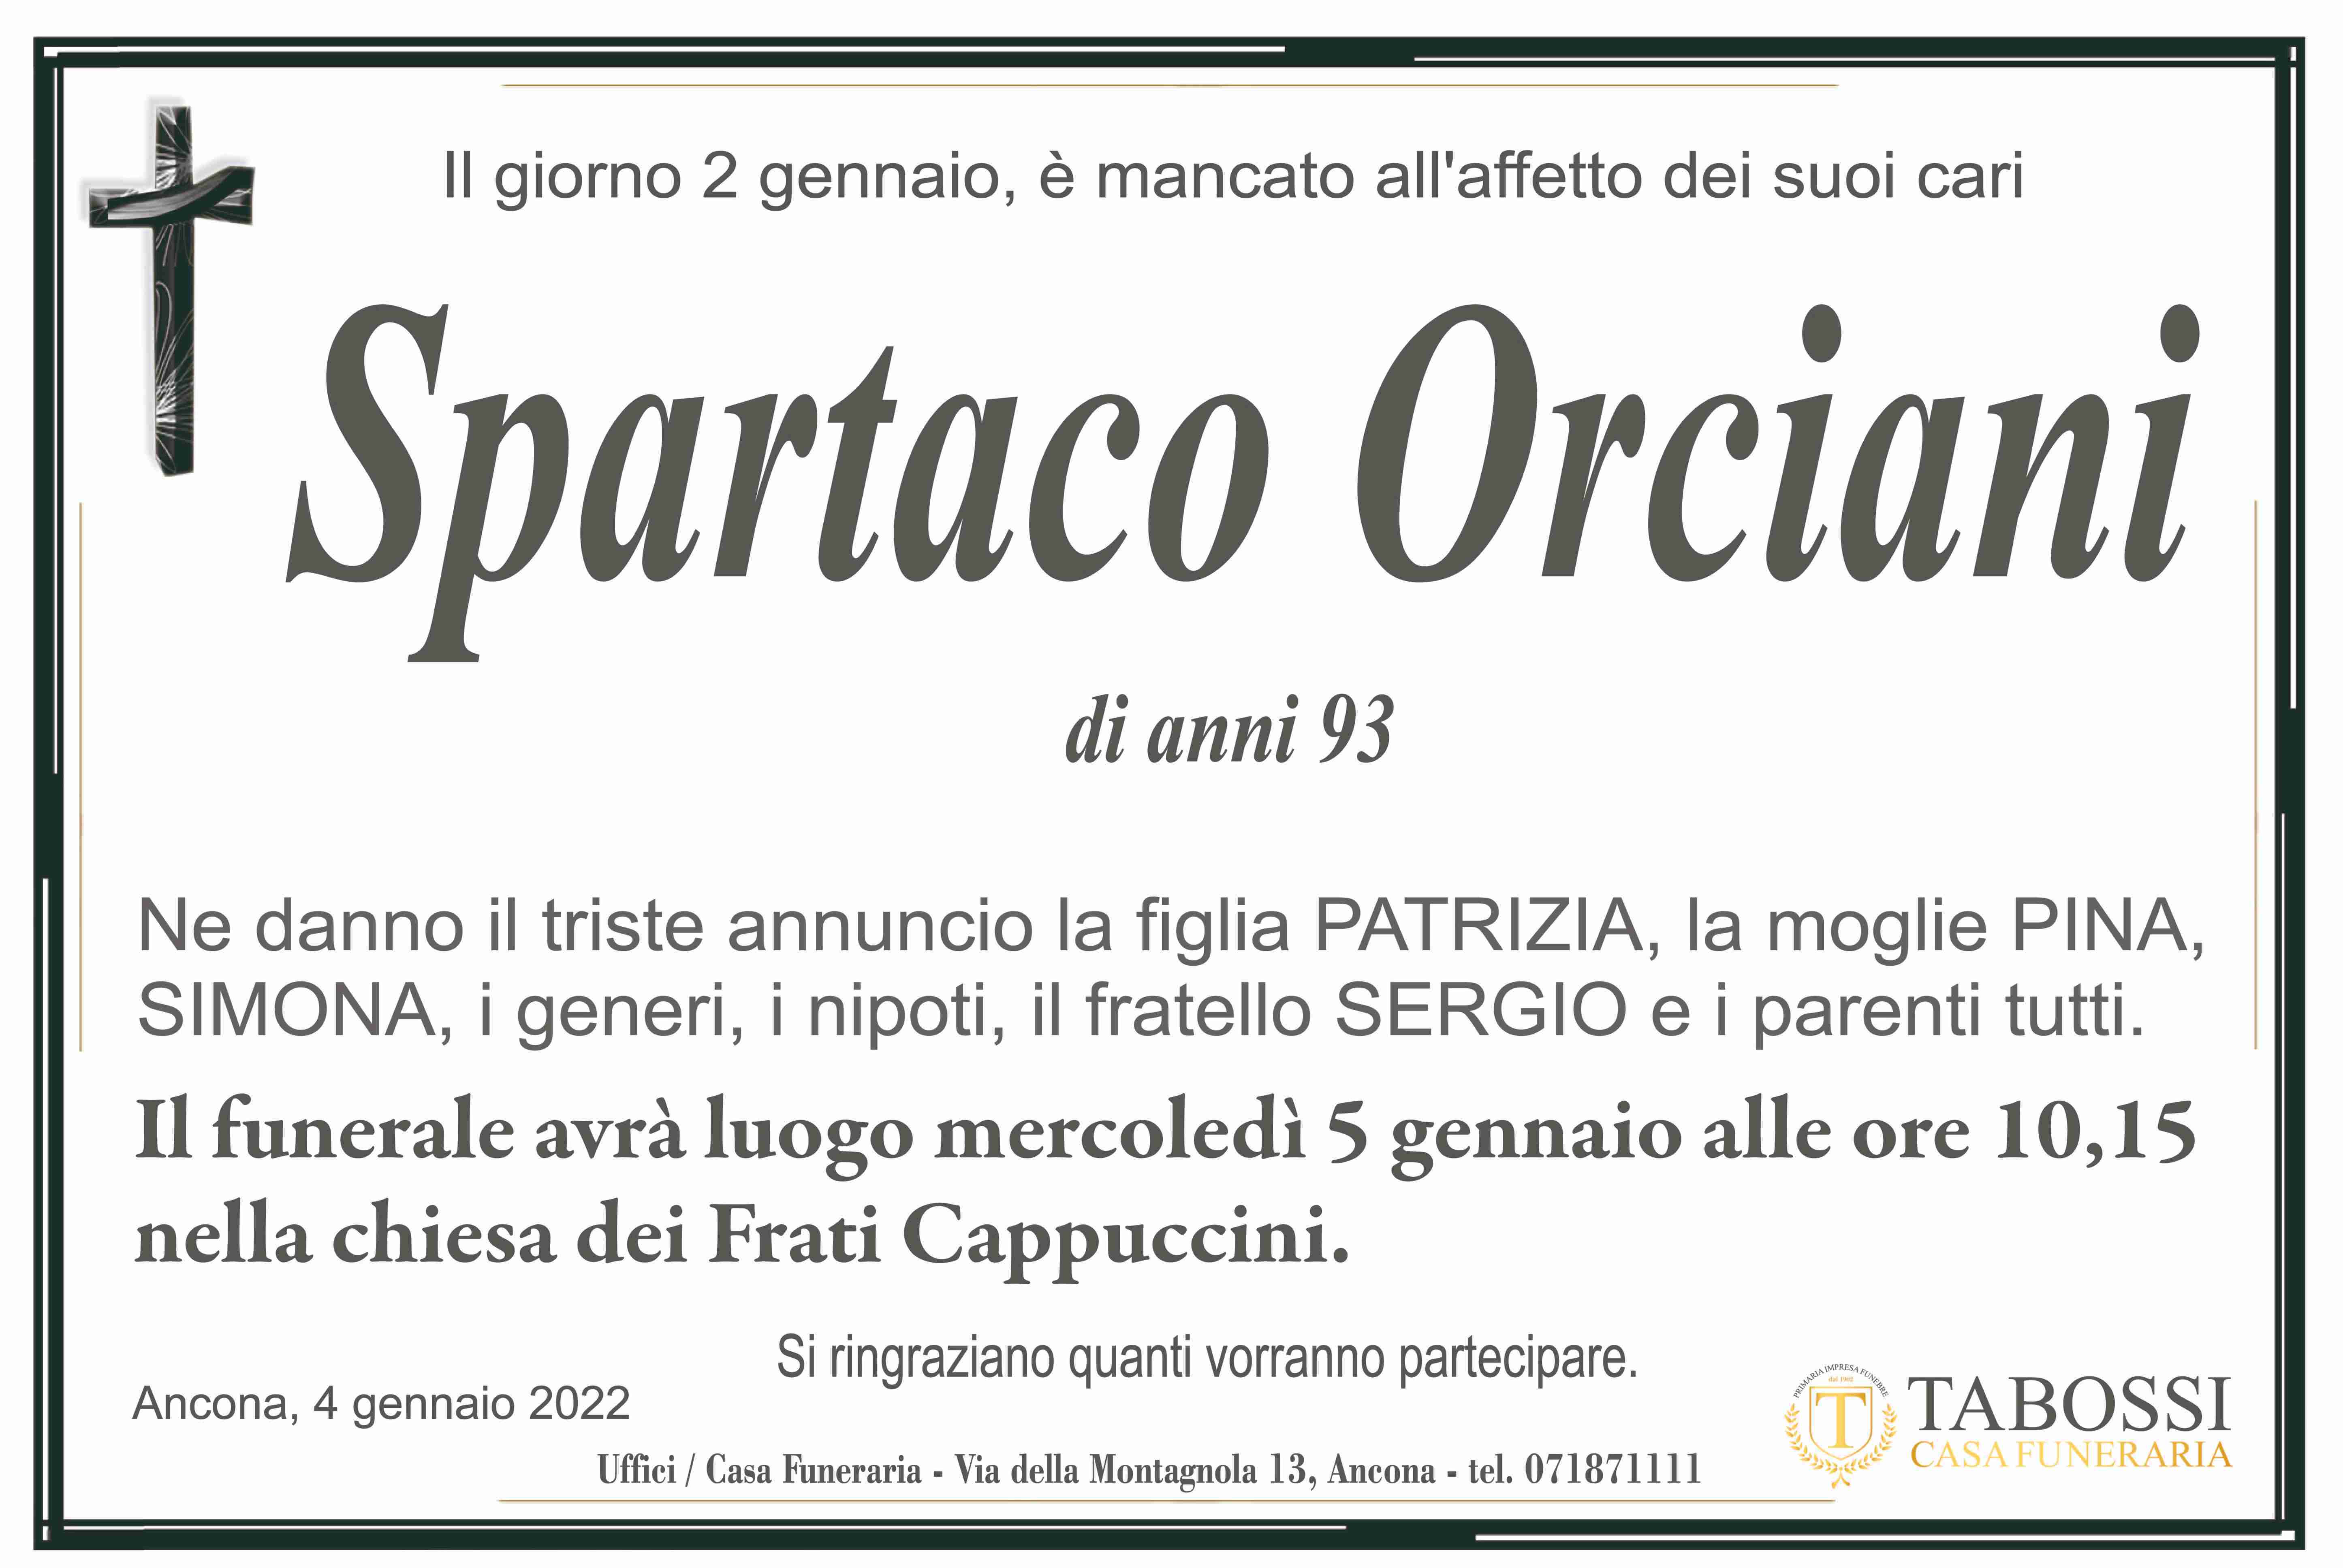 Spartaco Orciani